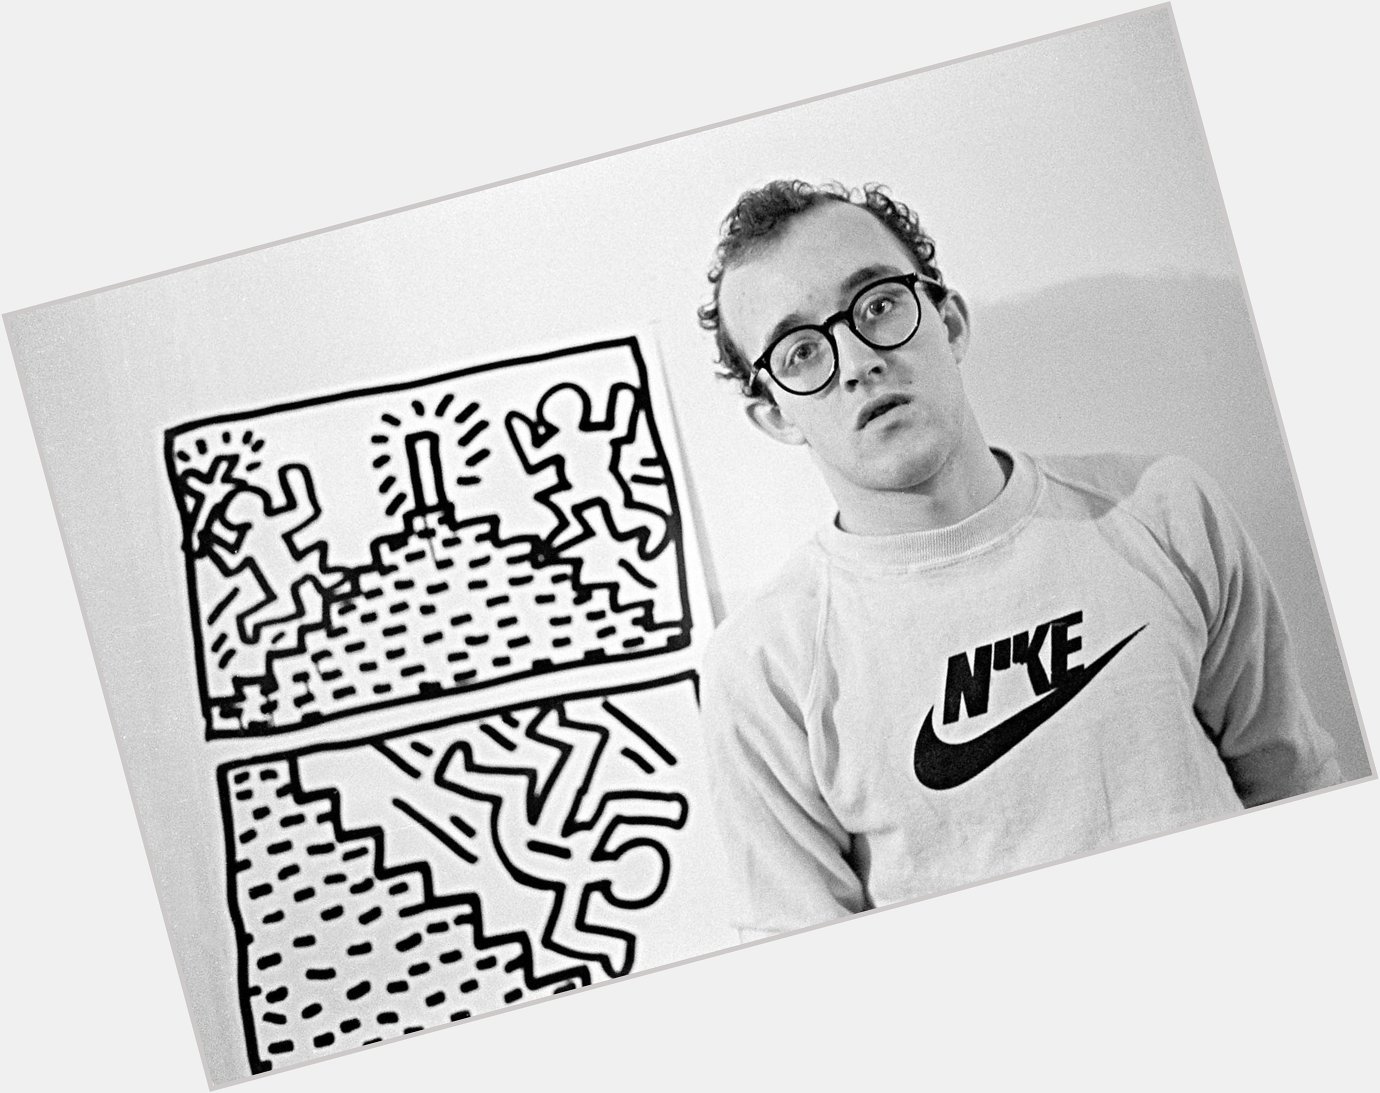 Happy birthday, Keith Haring. You should still be here today. Thank you for your art  